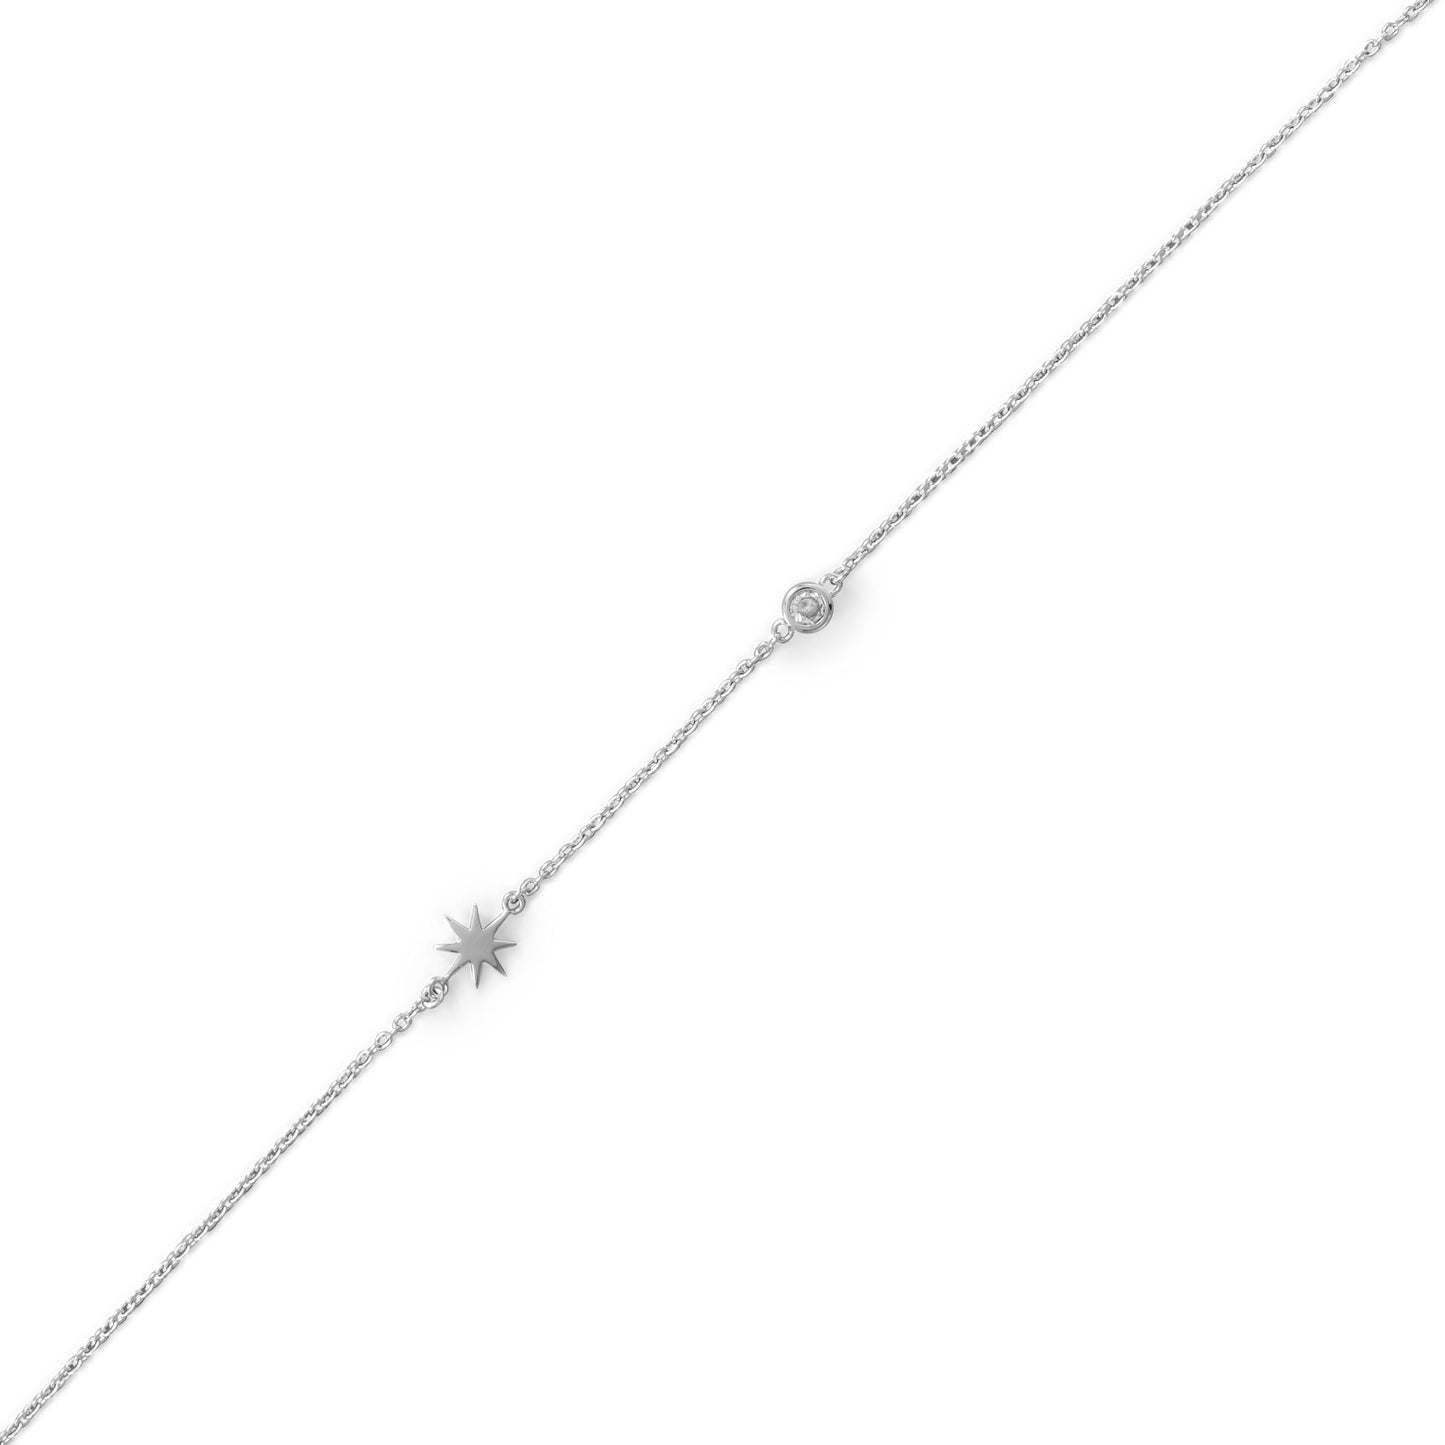 Sterling Silver Cubic Zirconia and Sunburst Charm Anklet